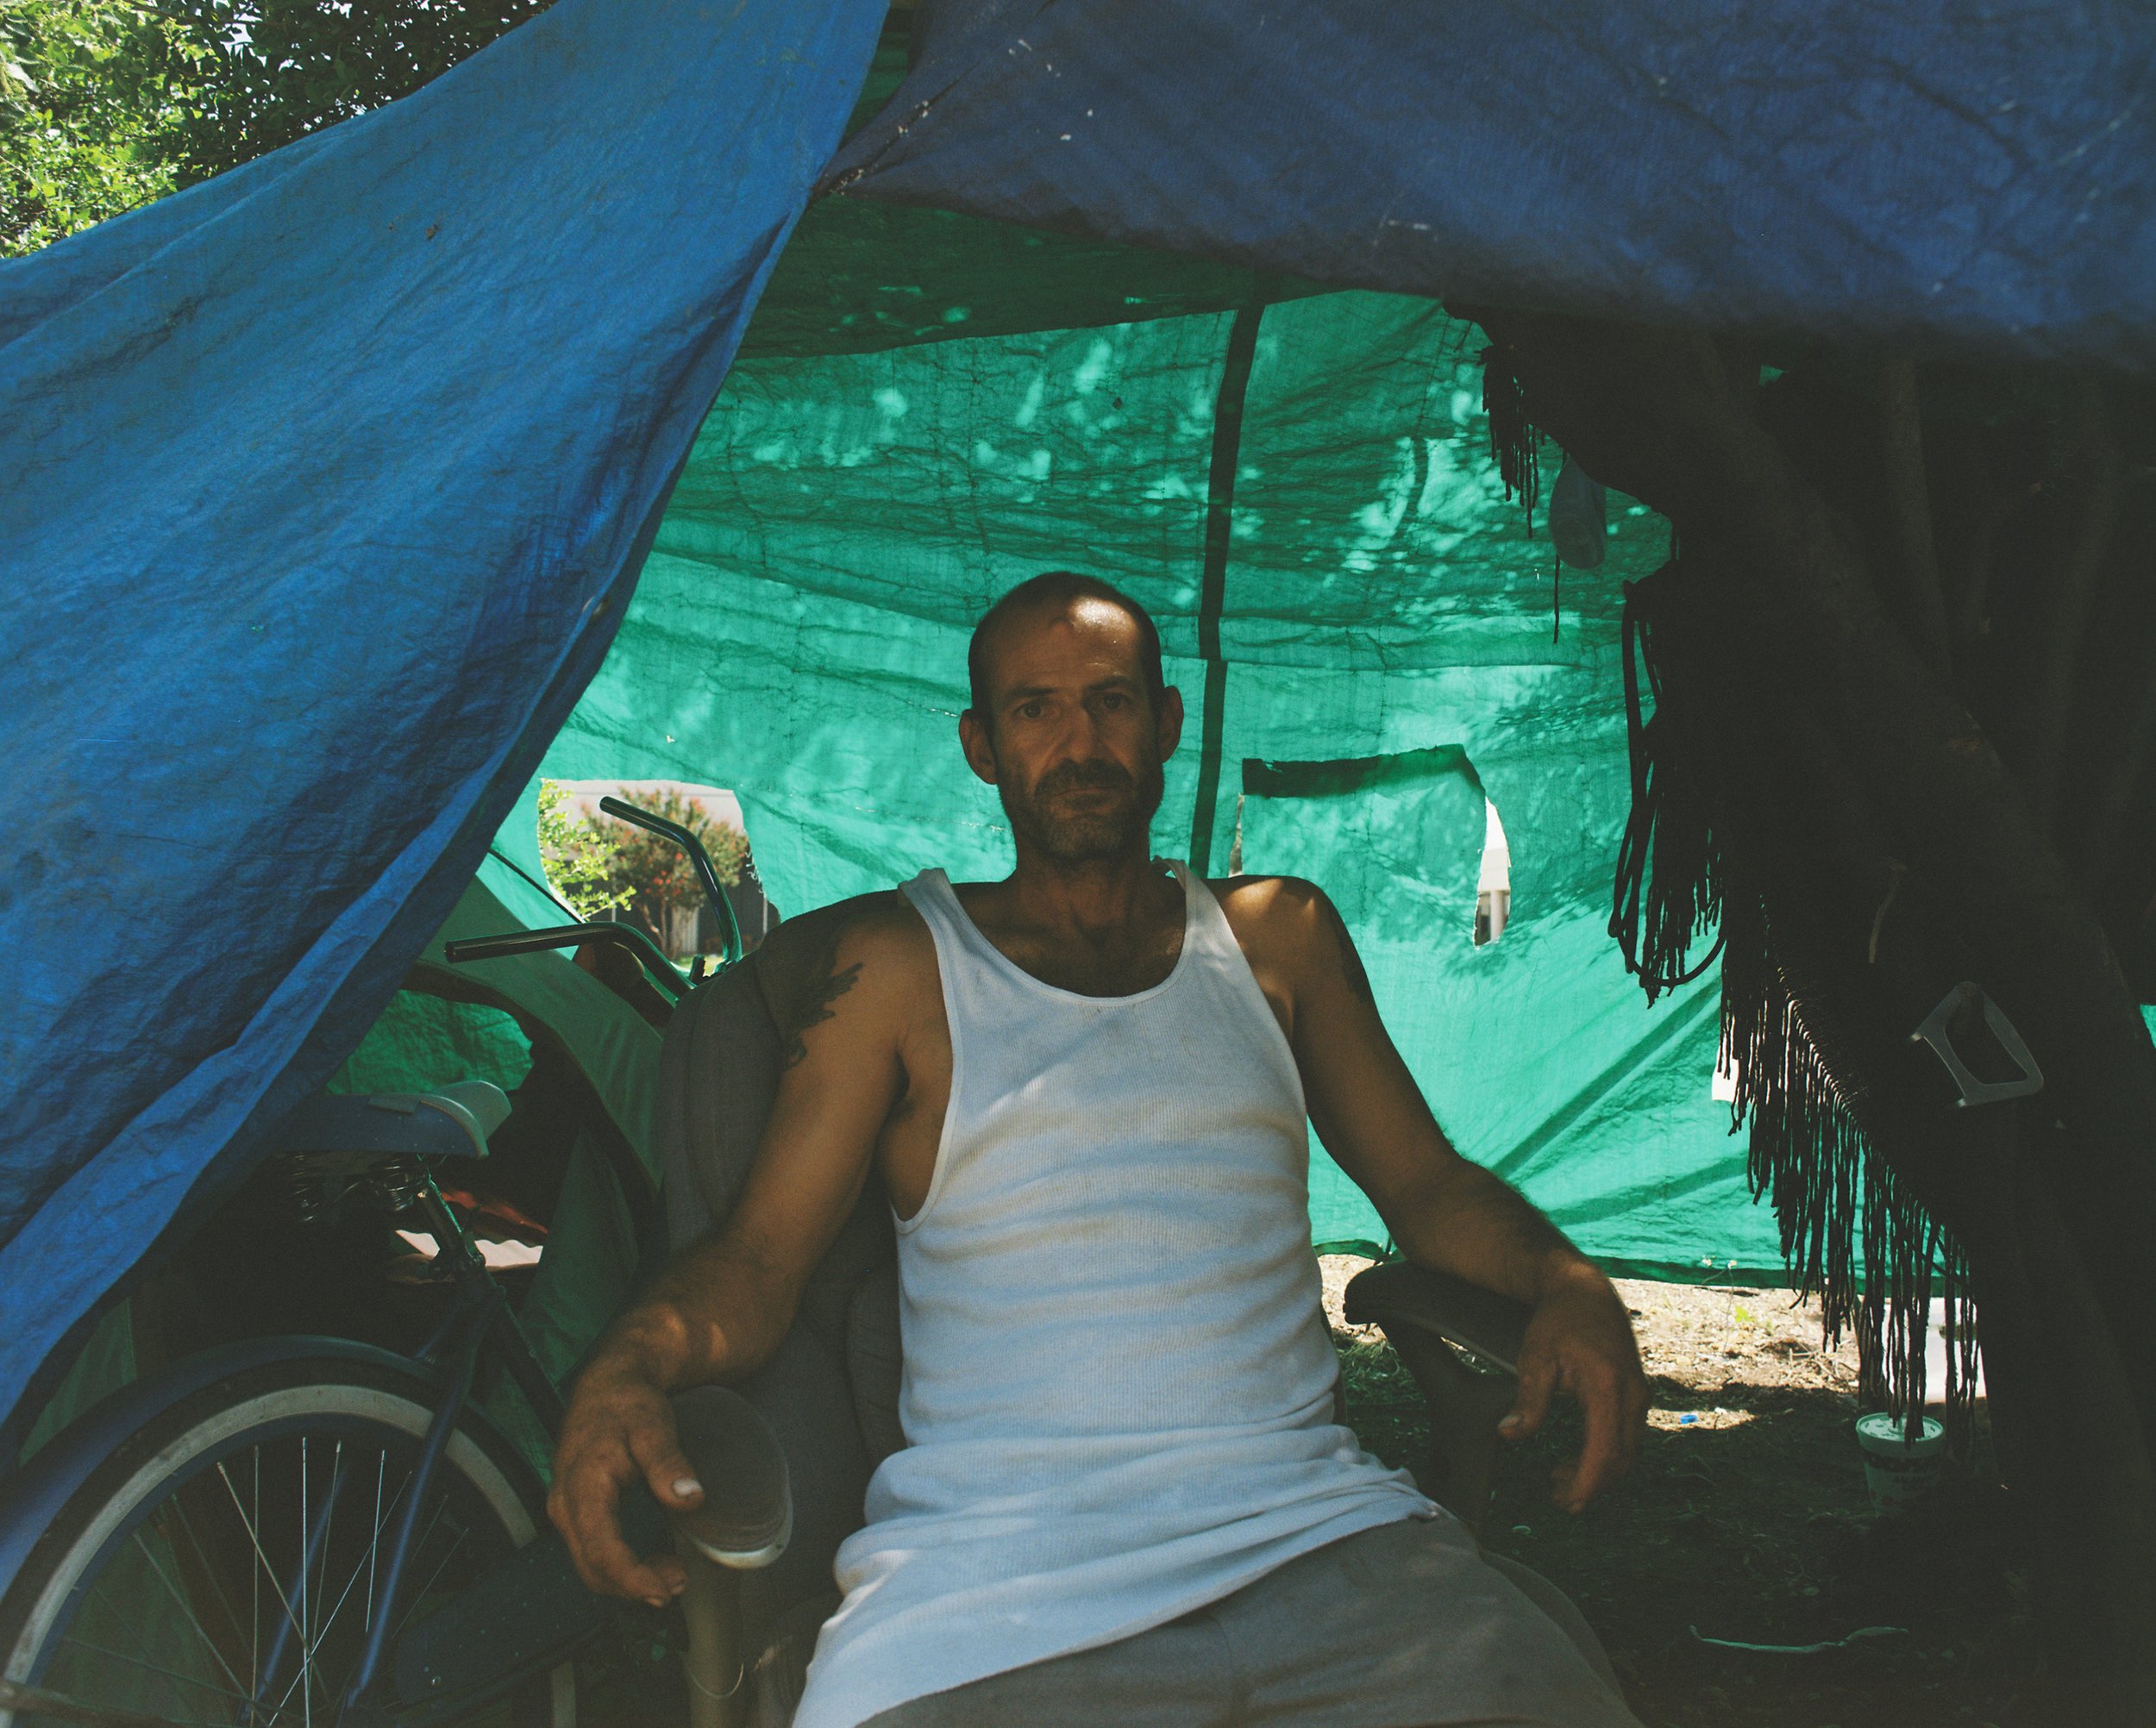  Mark, 41, lived at the Salvation Army for two years before he transitioned to the streets. His belongings were continuously stolen in the shelter so he went out into the streets. Mark doesn’t feel that the city cares about the homeless and that the 